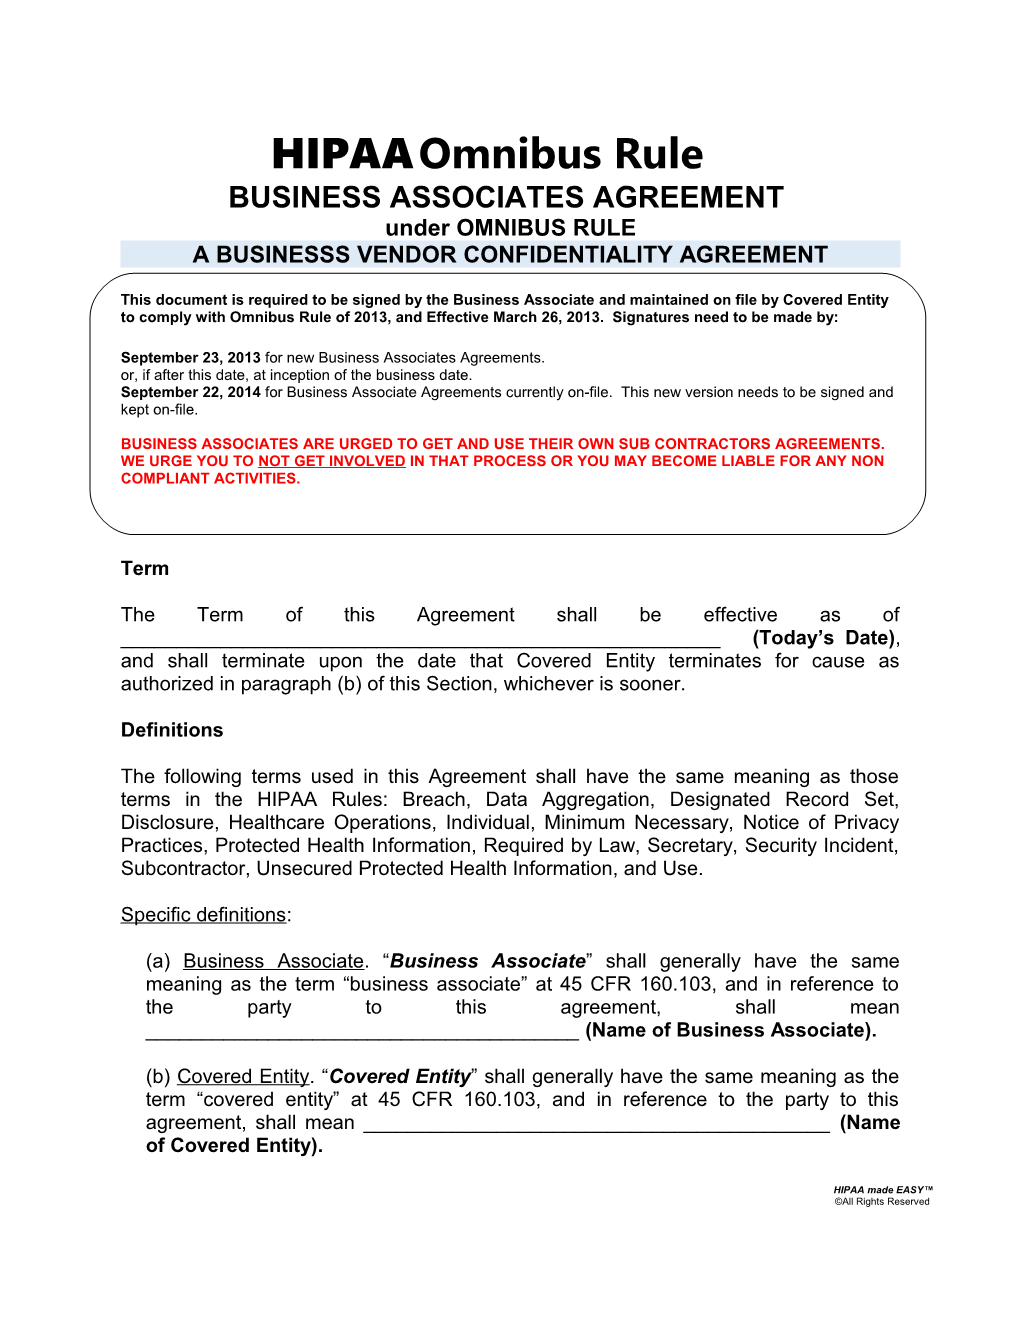 A Businesss Vendor Confidentiality Agreement